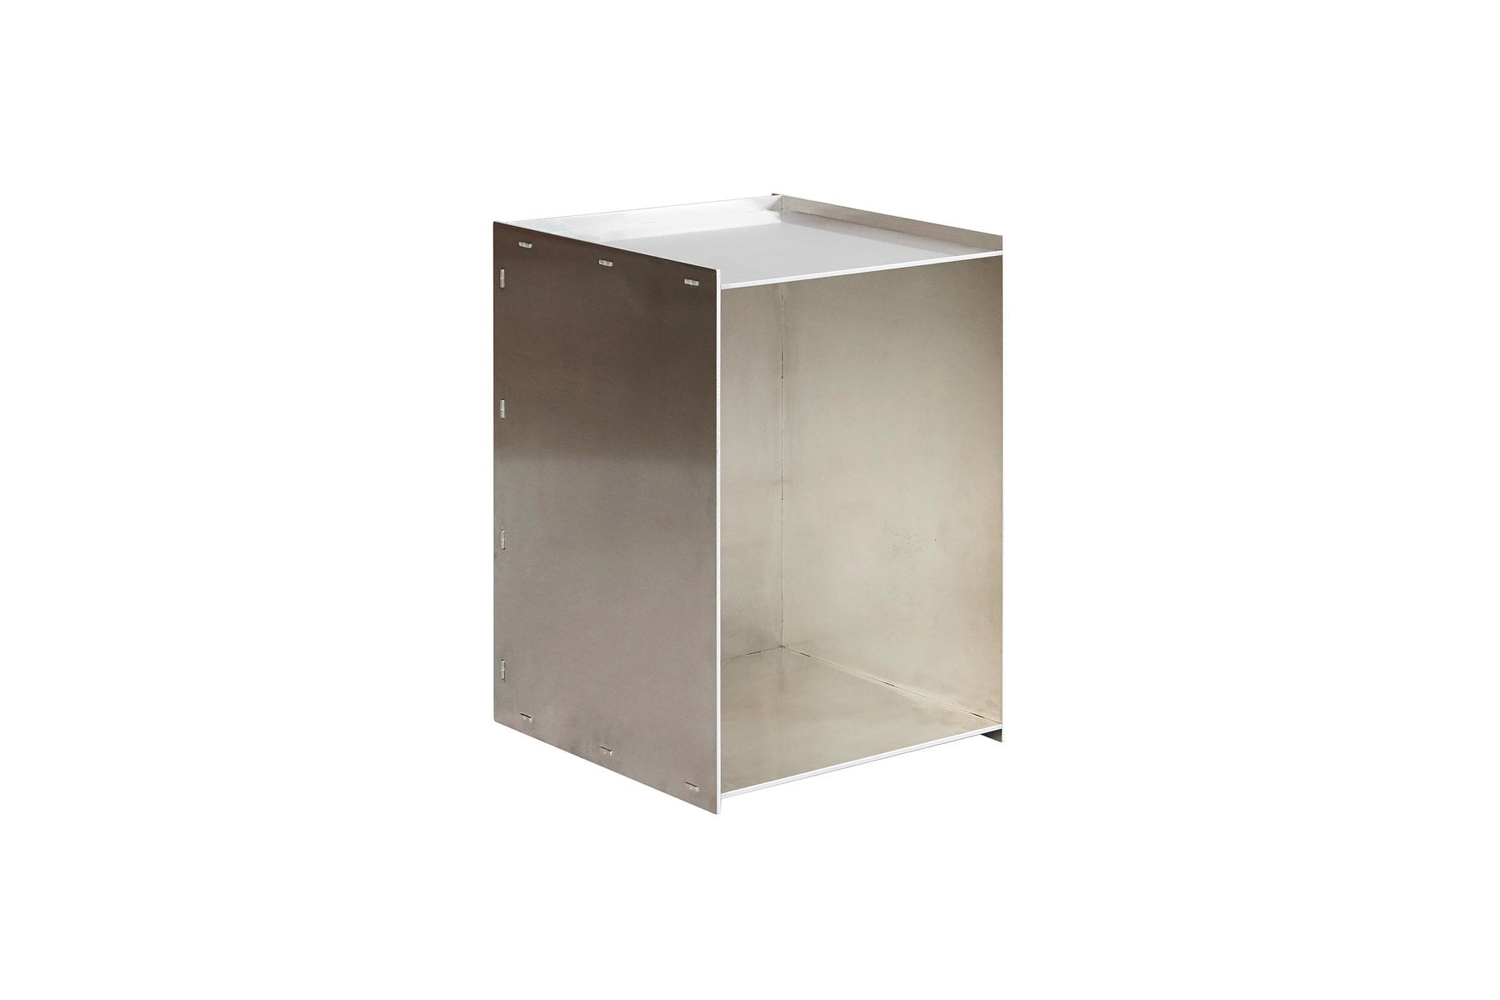 the frama rivet box table made of aluminum is \$8\27 at finnish design shop. 20